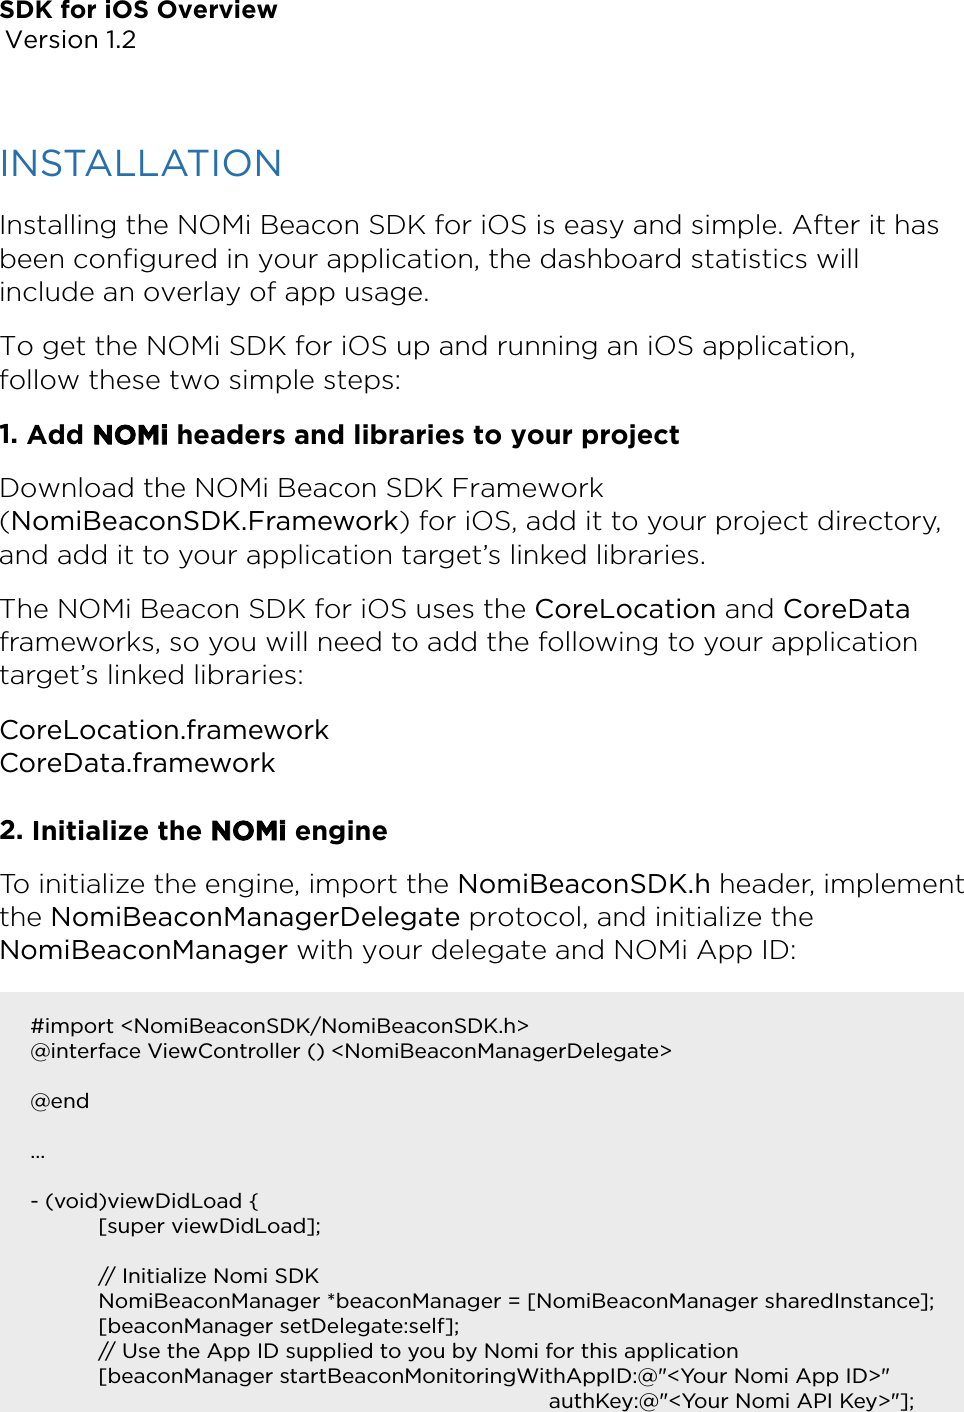 SDK for iOS Overview Version 1.2INSTALLATION Installing the NOMi Beacon SDK for iOS is easy and simple. After it has been conﬁgured in your application, the dashboard statistics will include an overlay of app usage. To get the NOMi SDK for iOS up and running an iOS application, follow these two simple steps: 1.Add NOMi headers and libraries to your projectDownload the NOMi Beacon SDK Framework (NomiBeaconSDK.Framework) for iOS, add it to your project directory, and add it to your application target’s linked libraries. The NOMi Beacon SDK for iOS uses the CoreLocation and CoreData frameworks, so you will need to add the following to your application target’s linked libraries: CoreLocation.framework CoreData.framework 2.Initialize the NOMi engineTo initialize the engine, import the NomiBeaconSDK.h header, implement the NomiBeaconManagerDelegate protocol, and initialize the NomiBeaconManager with your delegate and NOMi App ID: #import &lt;NomiBeaconSDK/NomiBeaconSDK.h&gt; @interface ViewController () &lt;NomiBeaconManagerDelegate&gt; !@end … !- (void)viewDidLoad { [super viewDidLoad]; !// Initialize Nomi SDK NomiBeaconManager *beaconManager = [NomiBeaconManager sharedInstance]; [beaconManager setDelegate:self]; // Use the App ID supplied to you by Nomi for this application [beaconManager startBeaconMonitoringWithAppID:@&quot;&lt;Your Nomi App ID&gt;&quot;       authKey:@&quot;&lt;Your Nomi API Key&gt;&quot;]; 